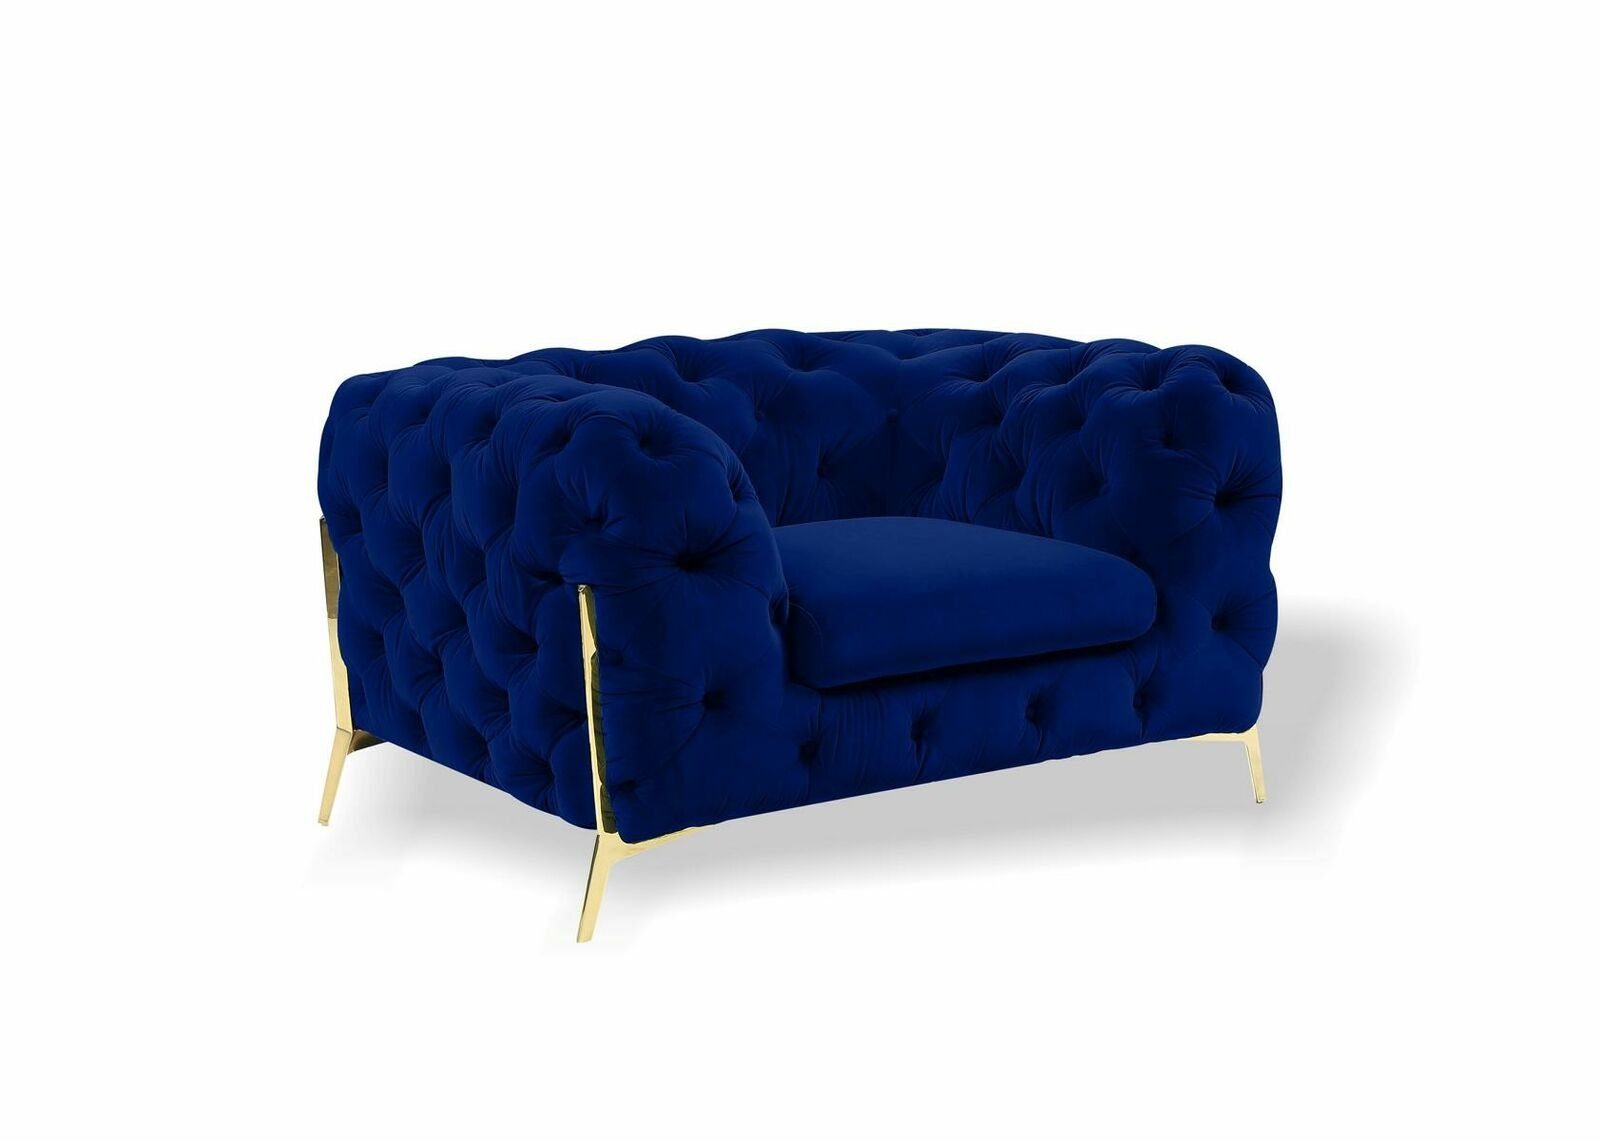 JVmoebel Ohrensessel Chesterfield Ohrensessel Sessel 1 Sitzer Sofa Couch Polster Couch (Sessel), Made in Europe Blau